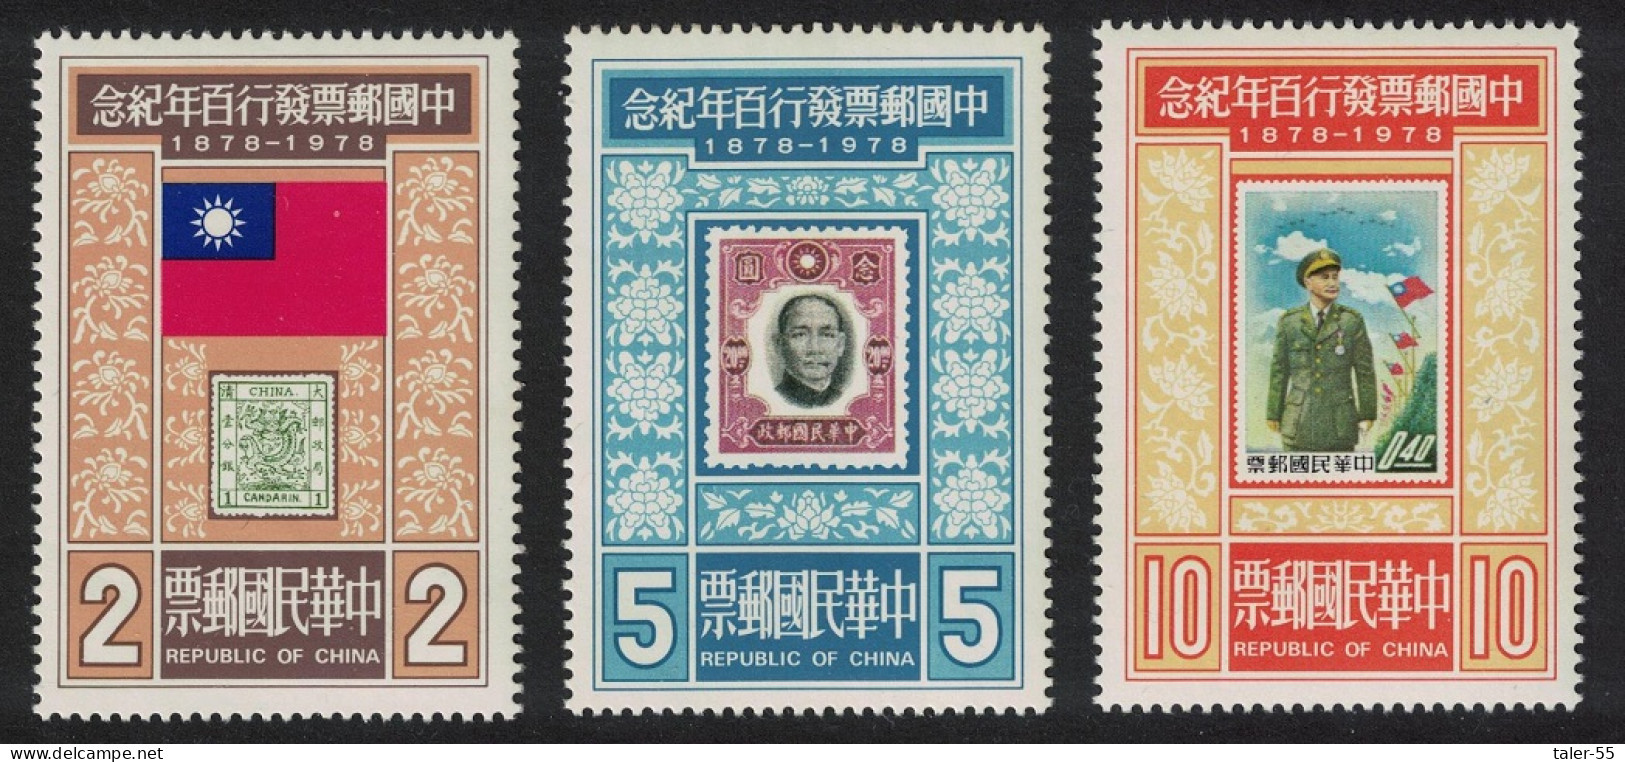 Taiwan Centenary Of Chinese Postage Stamp 3v 1978 MNH SG#1188-1190 - Ungebraucht